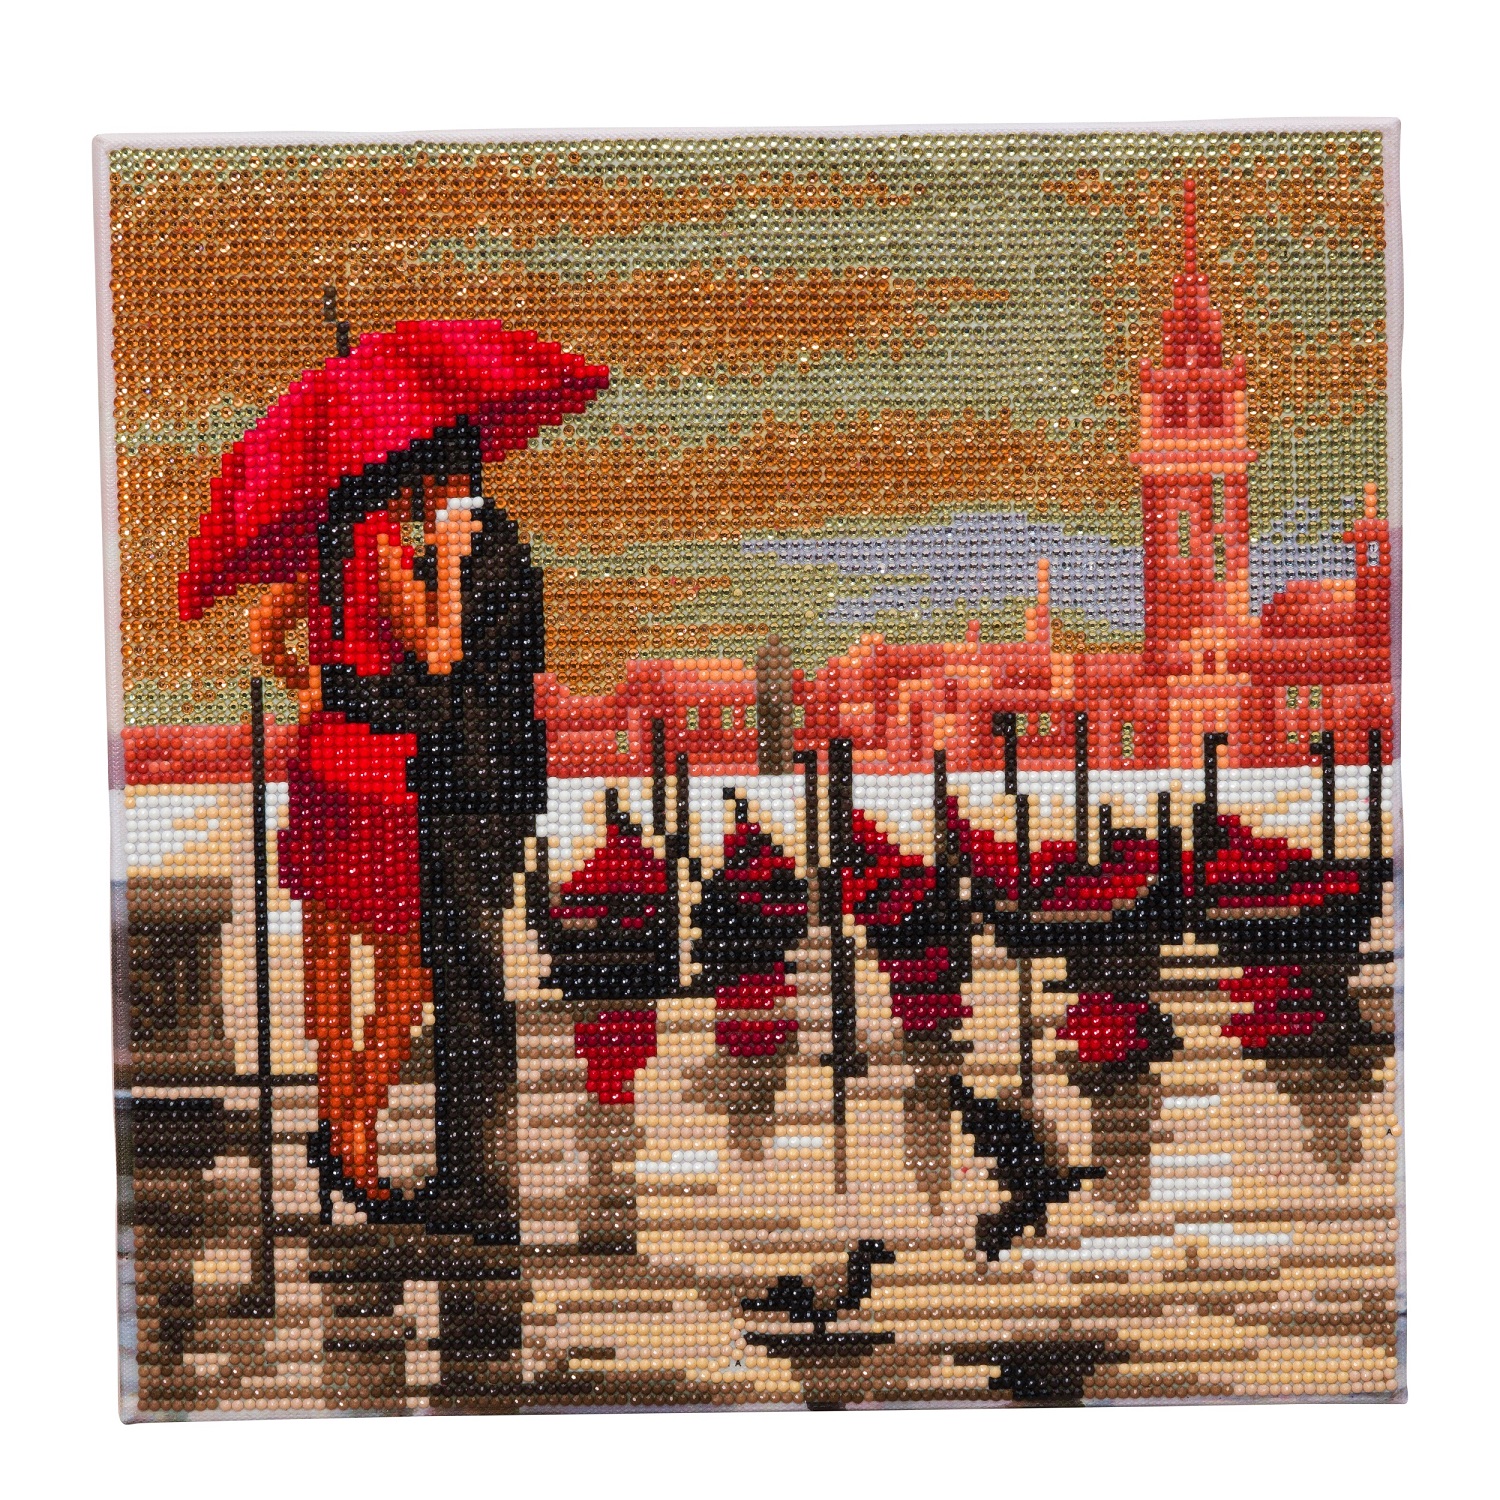 Craft Buddy Crystal Art / Diamond Painting 30cm x 30cm Picture Kit on Wood  Frame - Meet Me In Venice - Full Crystal